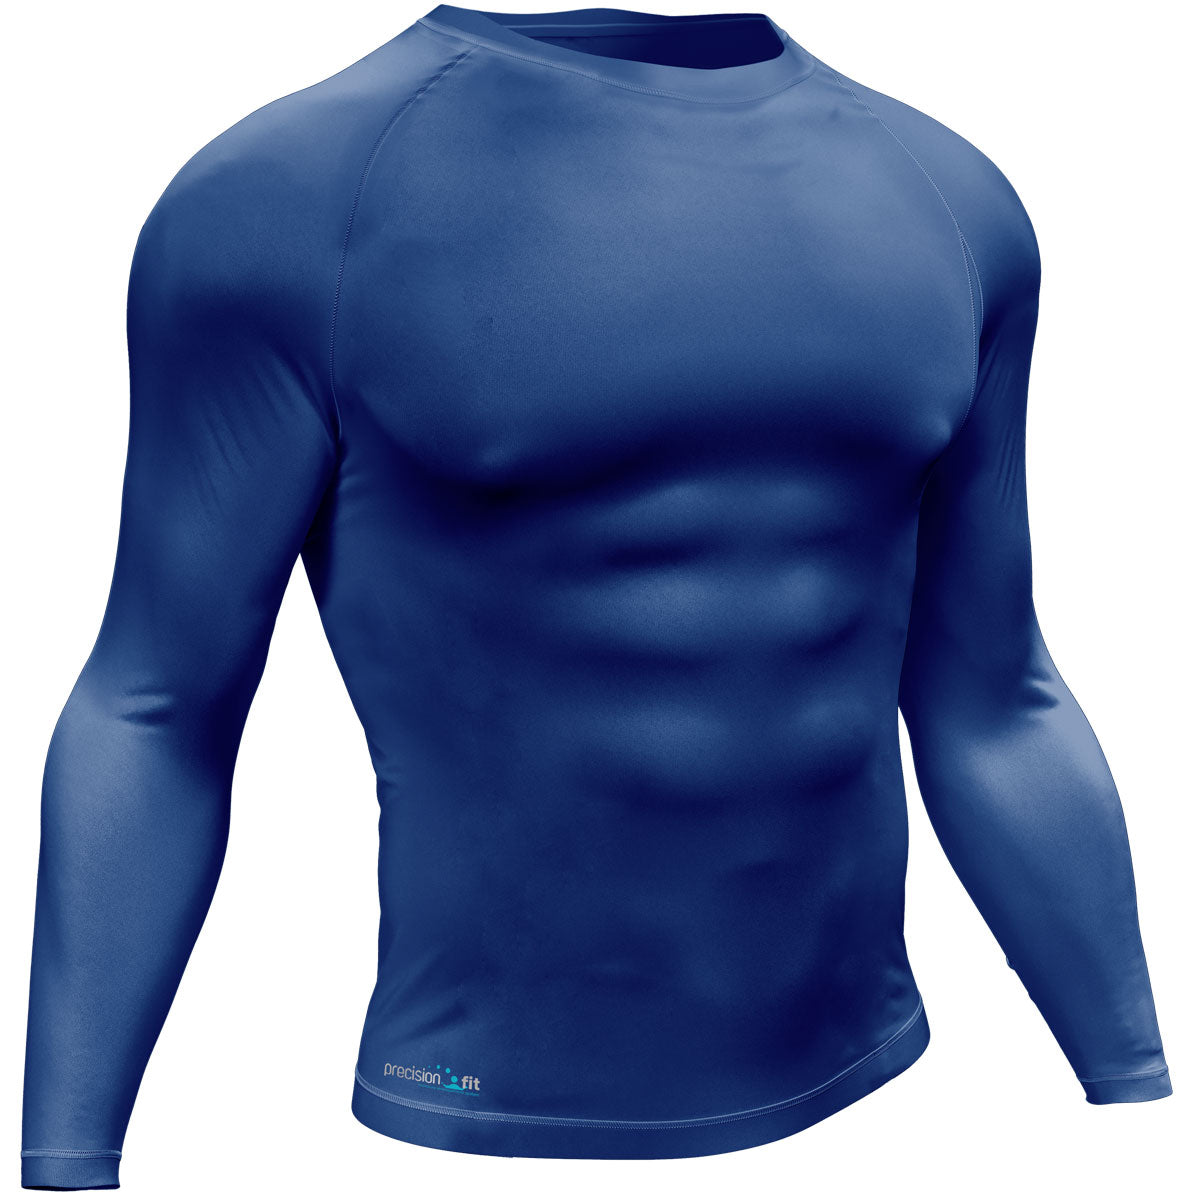 Precision Training Essential Baselayer Long Sleeve Shirt - Youth - Navy